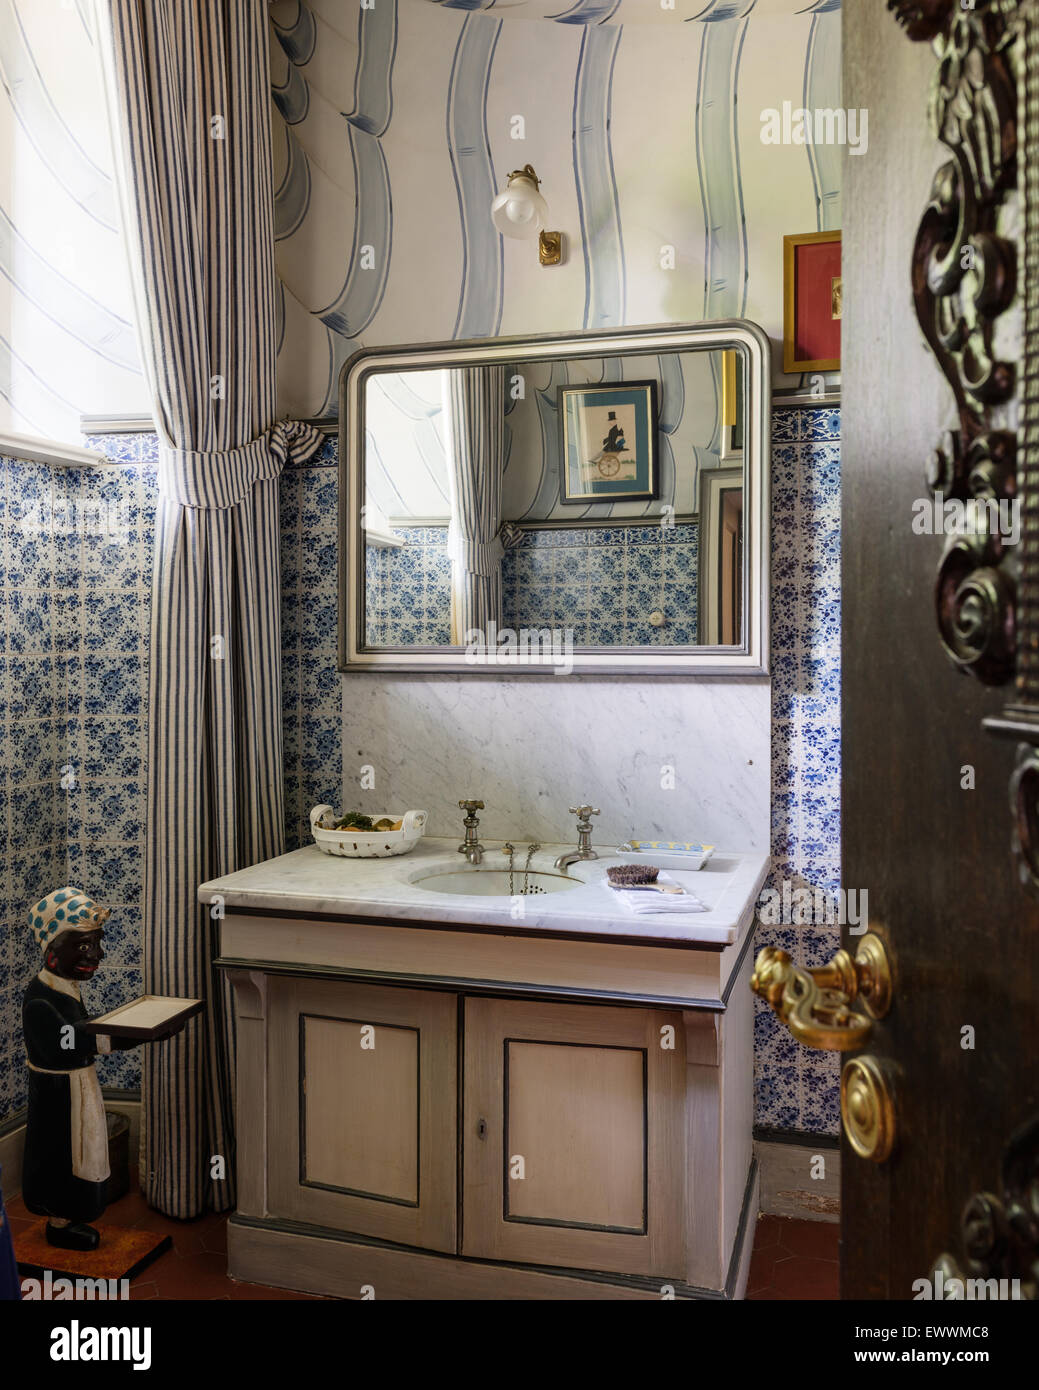 Marble topped vanity unit in cloakroom with tiled walls Stock Photo